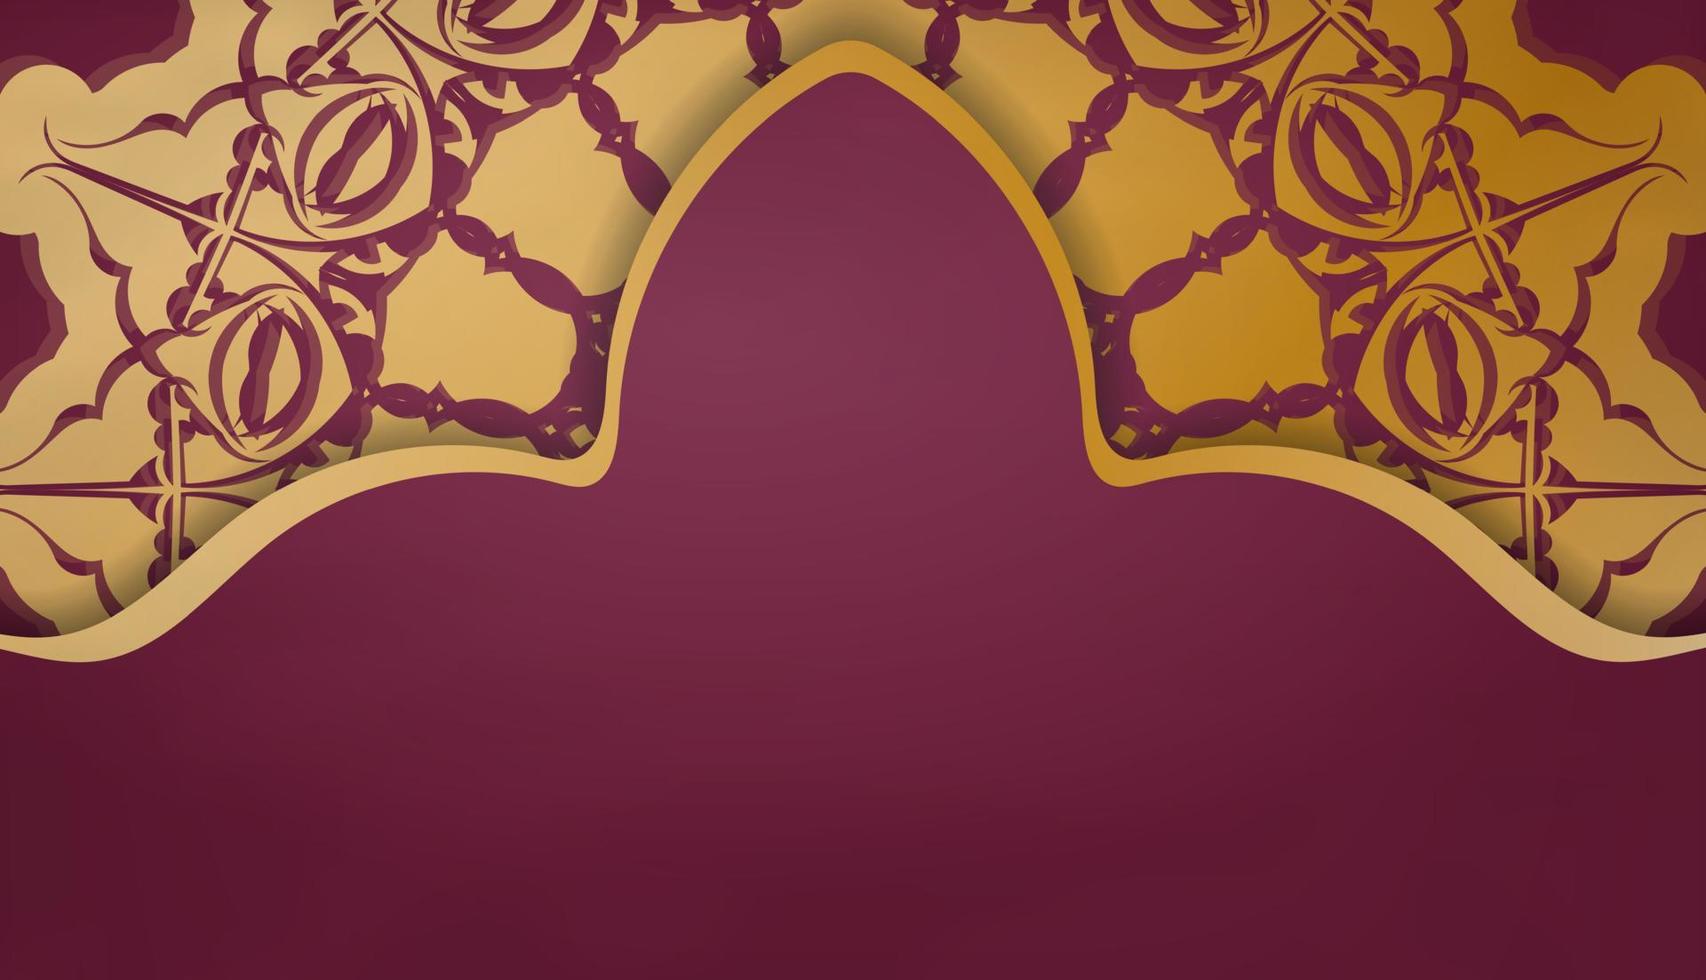 Baner of burgundy color with mandala gold pattern and place for logo or text vector